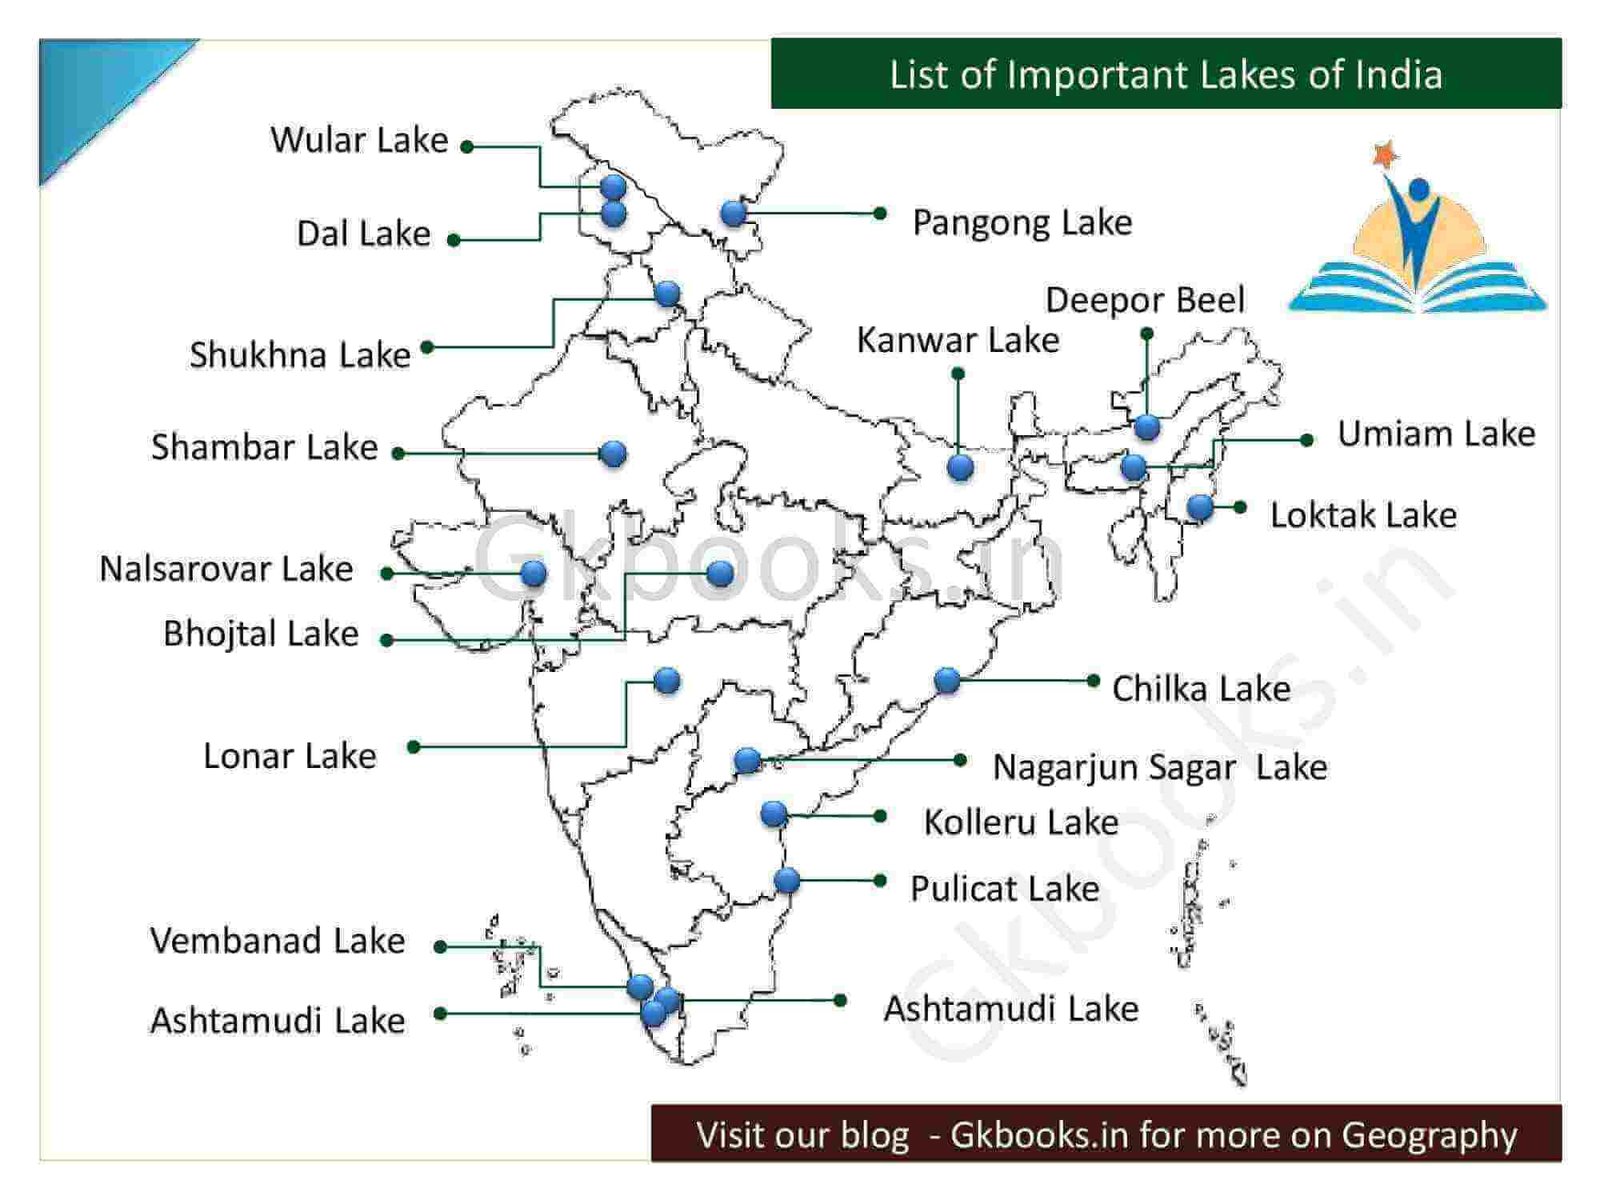 List of Important Lakes of India